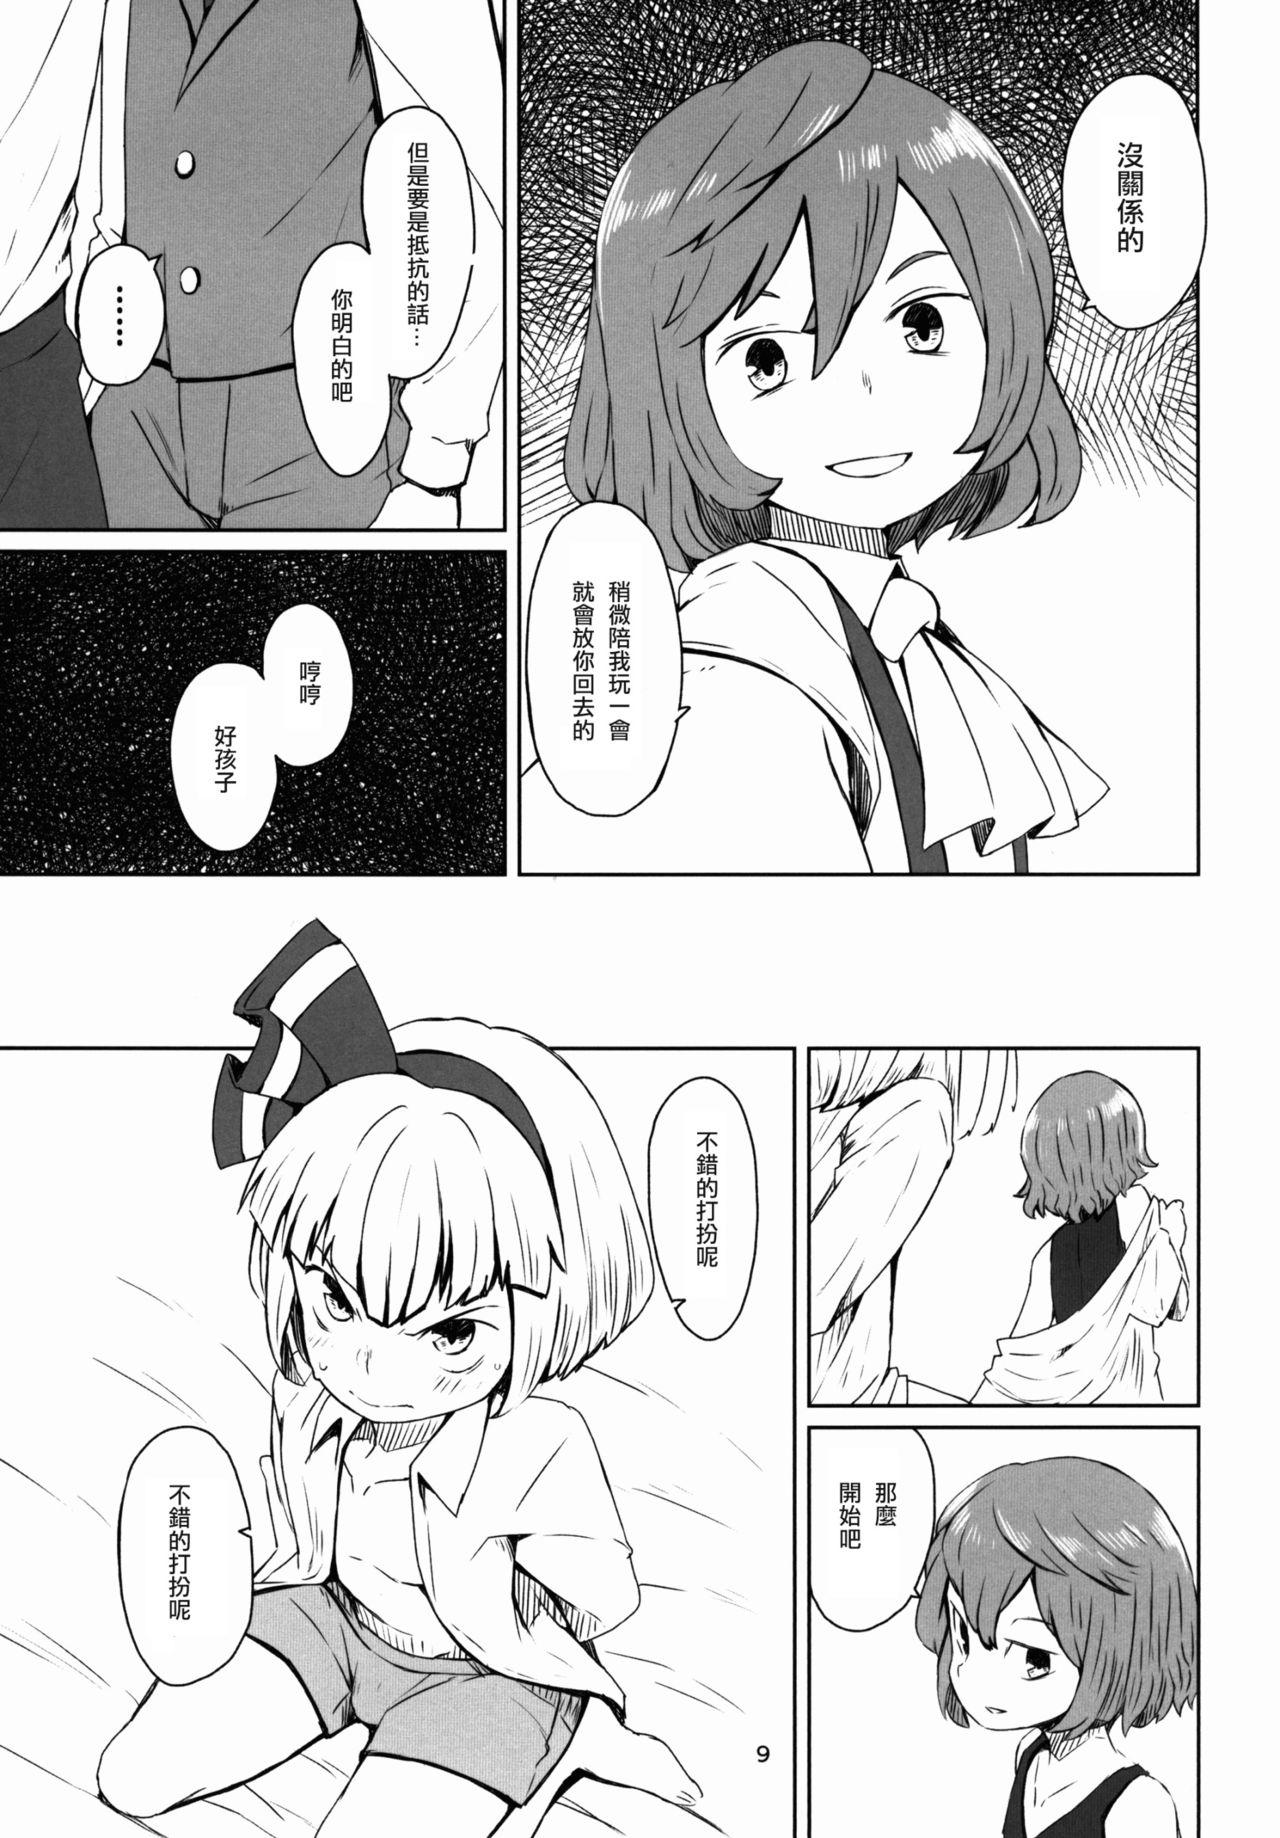 Transsexual Touhou Teien Tan - Touhou project Asia - Page 11